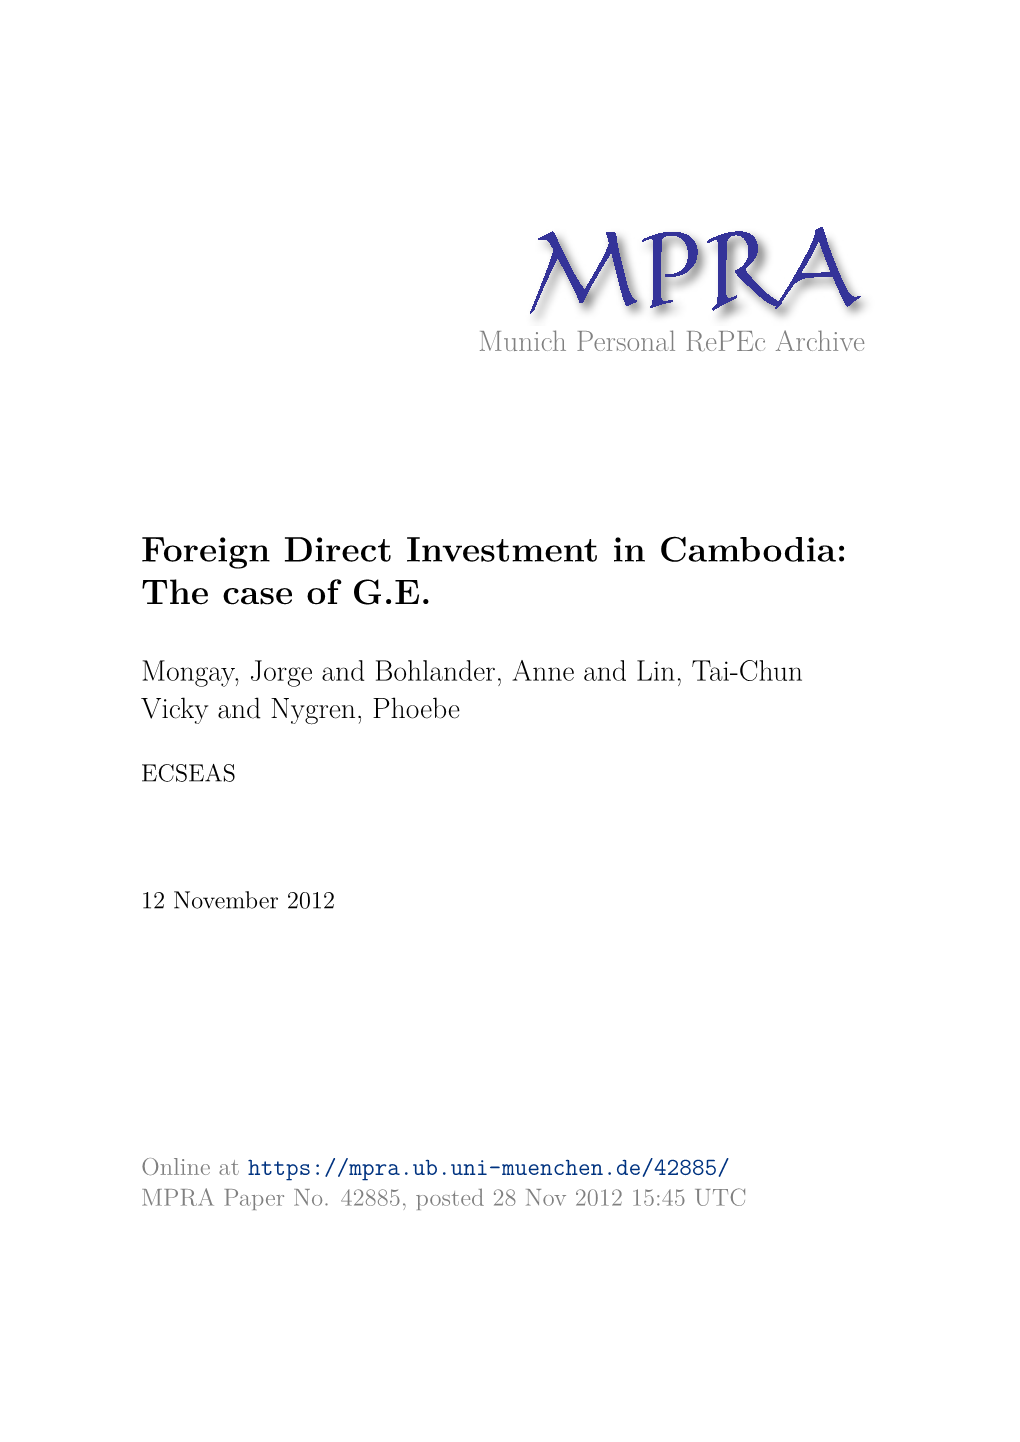 Foreign Direct Investment in Cambodia: the Case of G.E